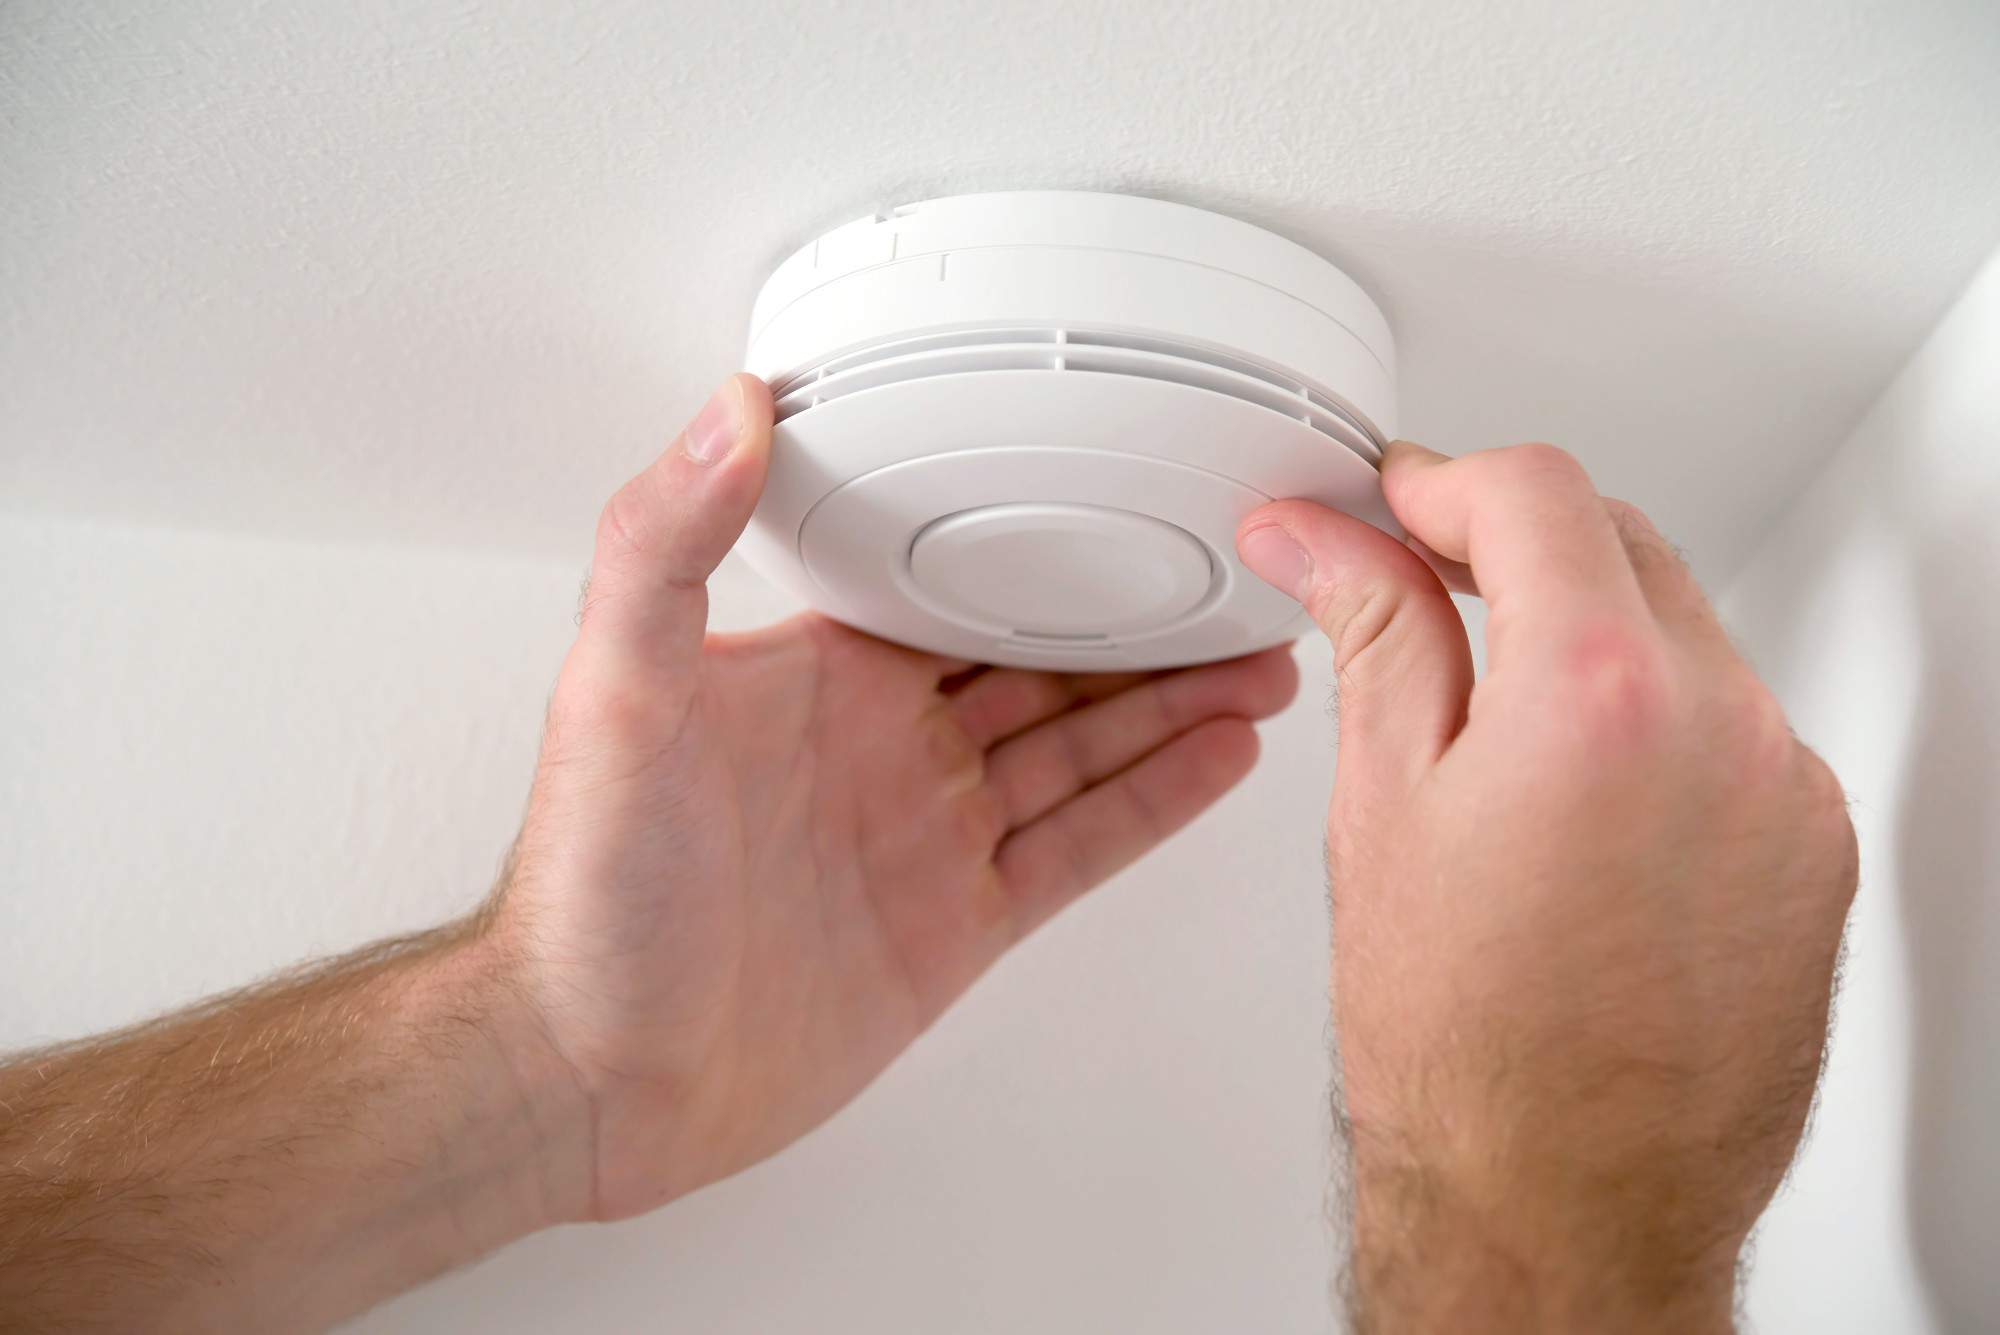 How to Test a Smoke Detector